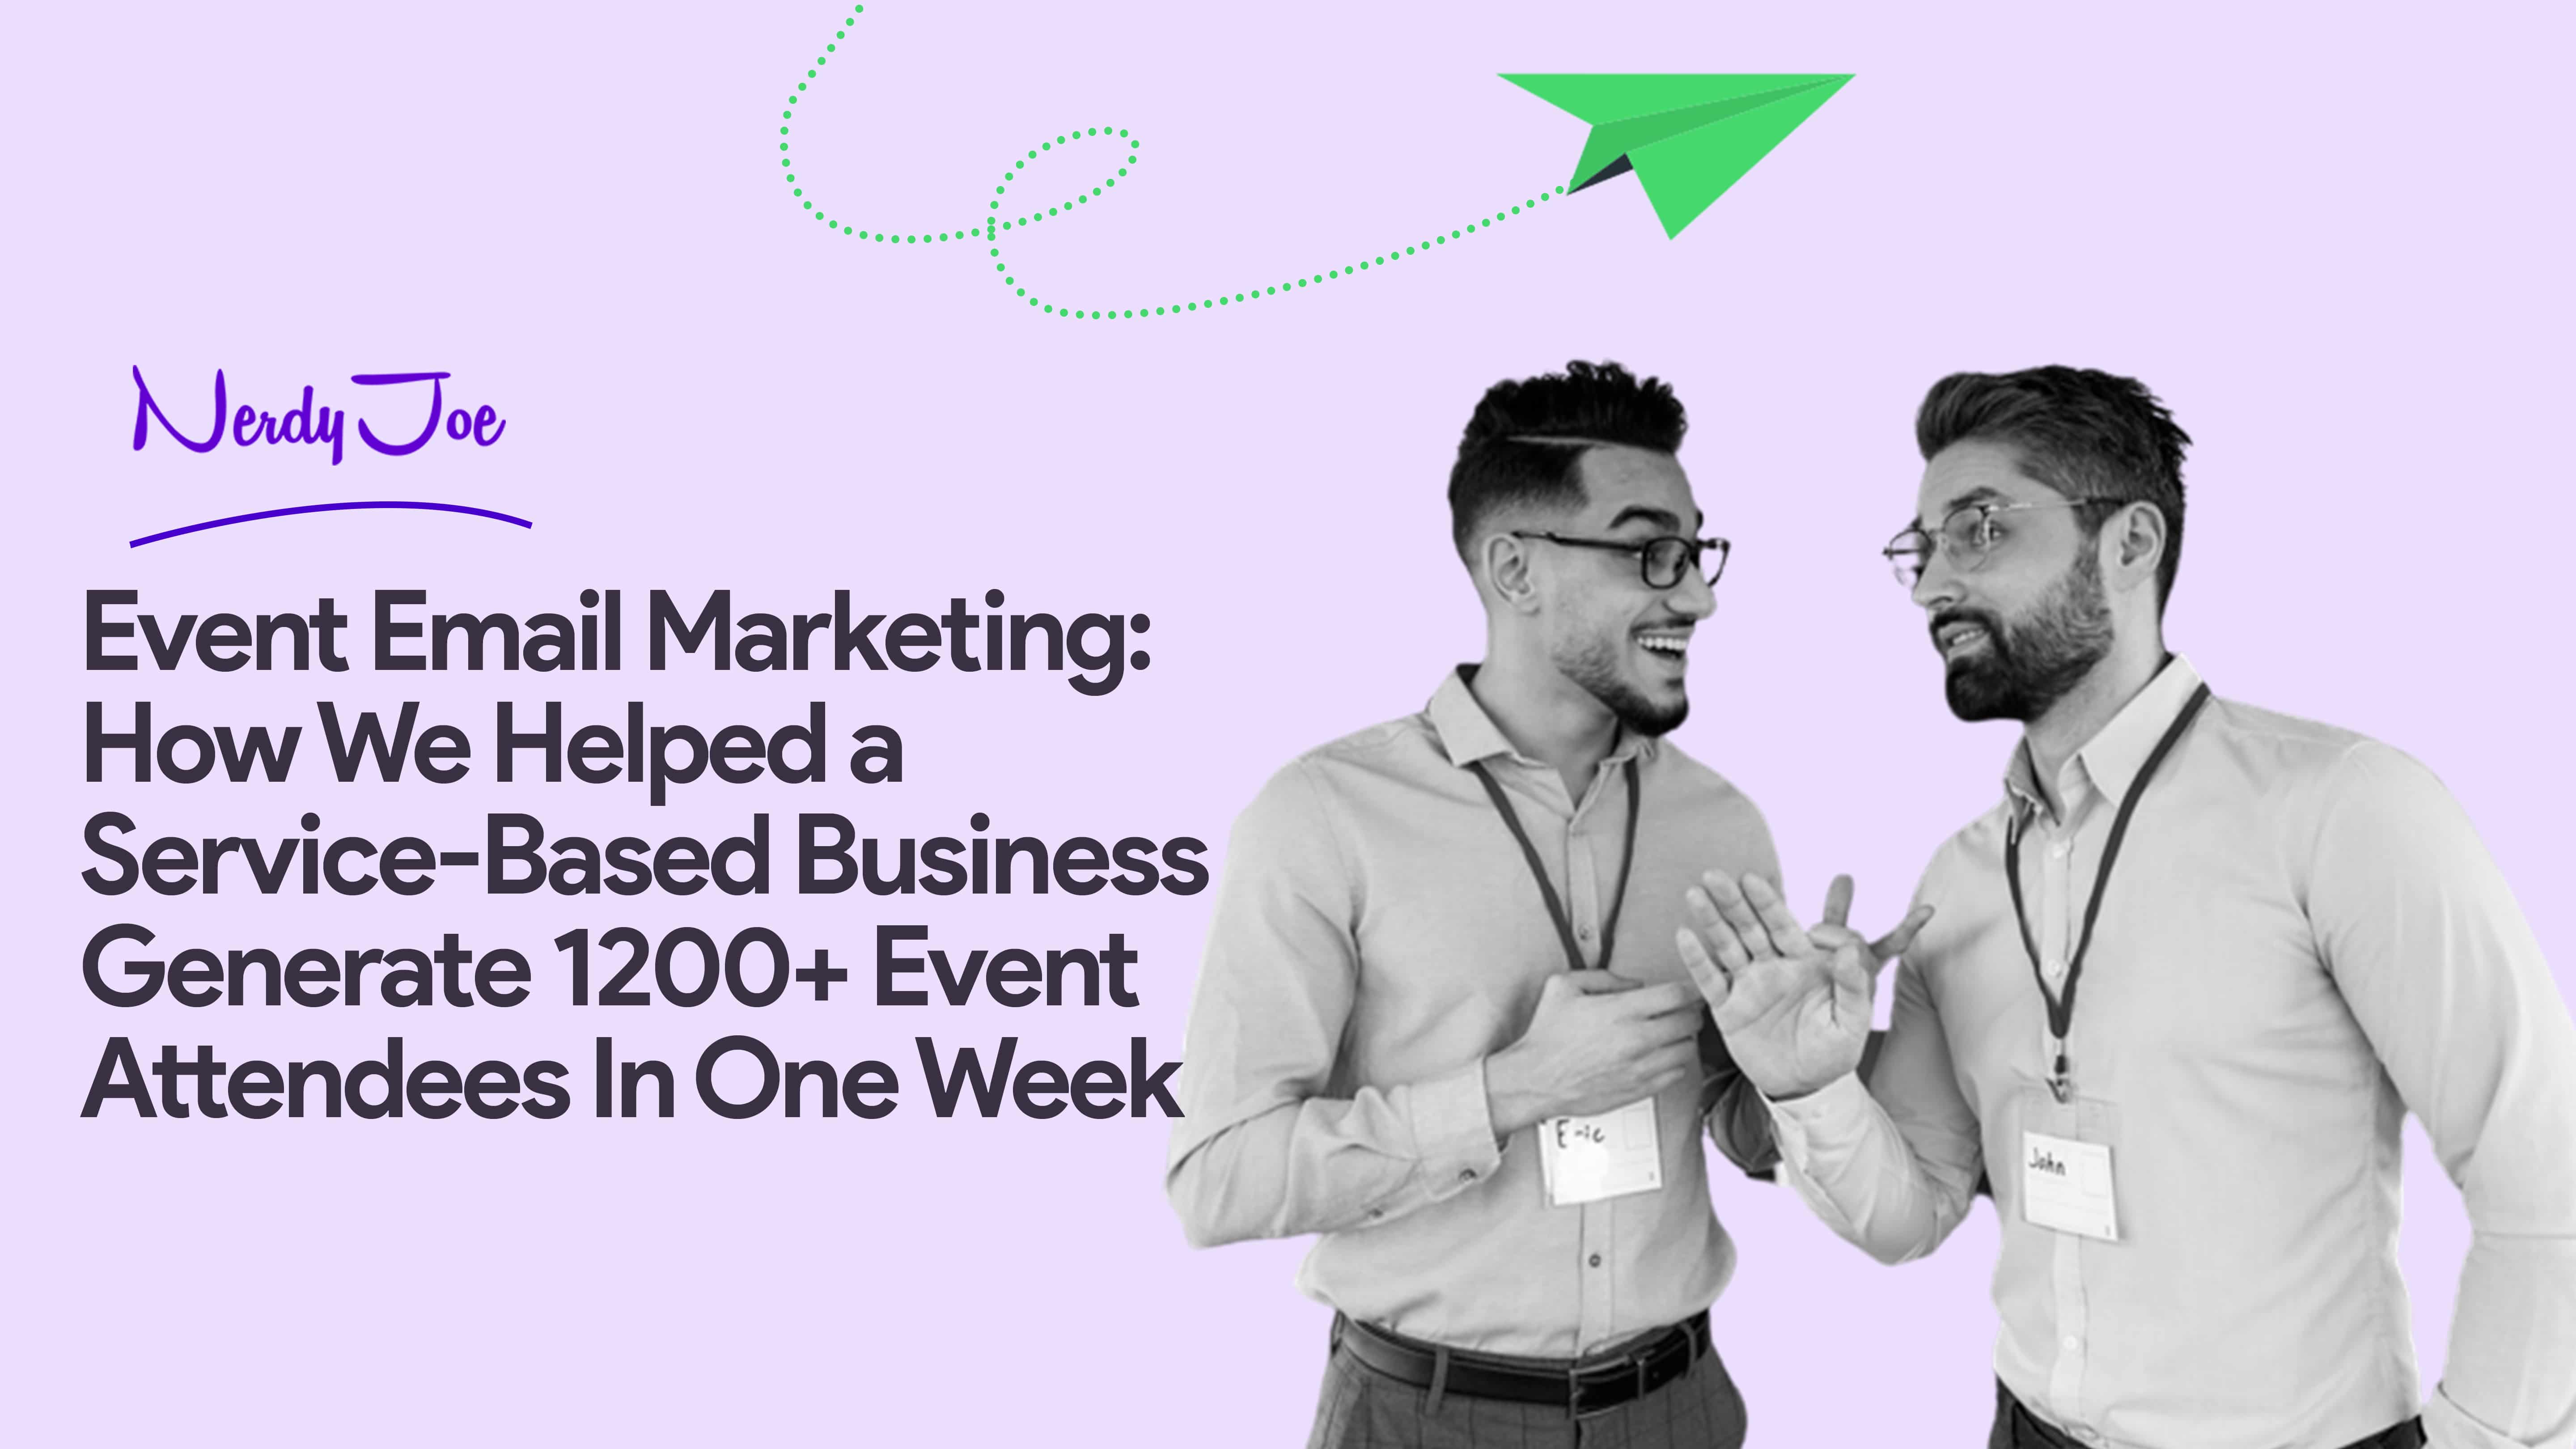 Event Email Marketing: How We Helped a Service-Based Business Generate 1200+ Event Attendees In One Week